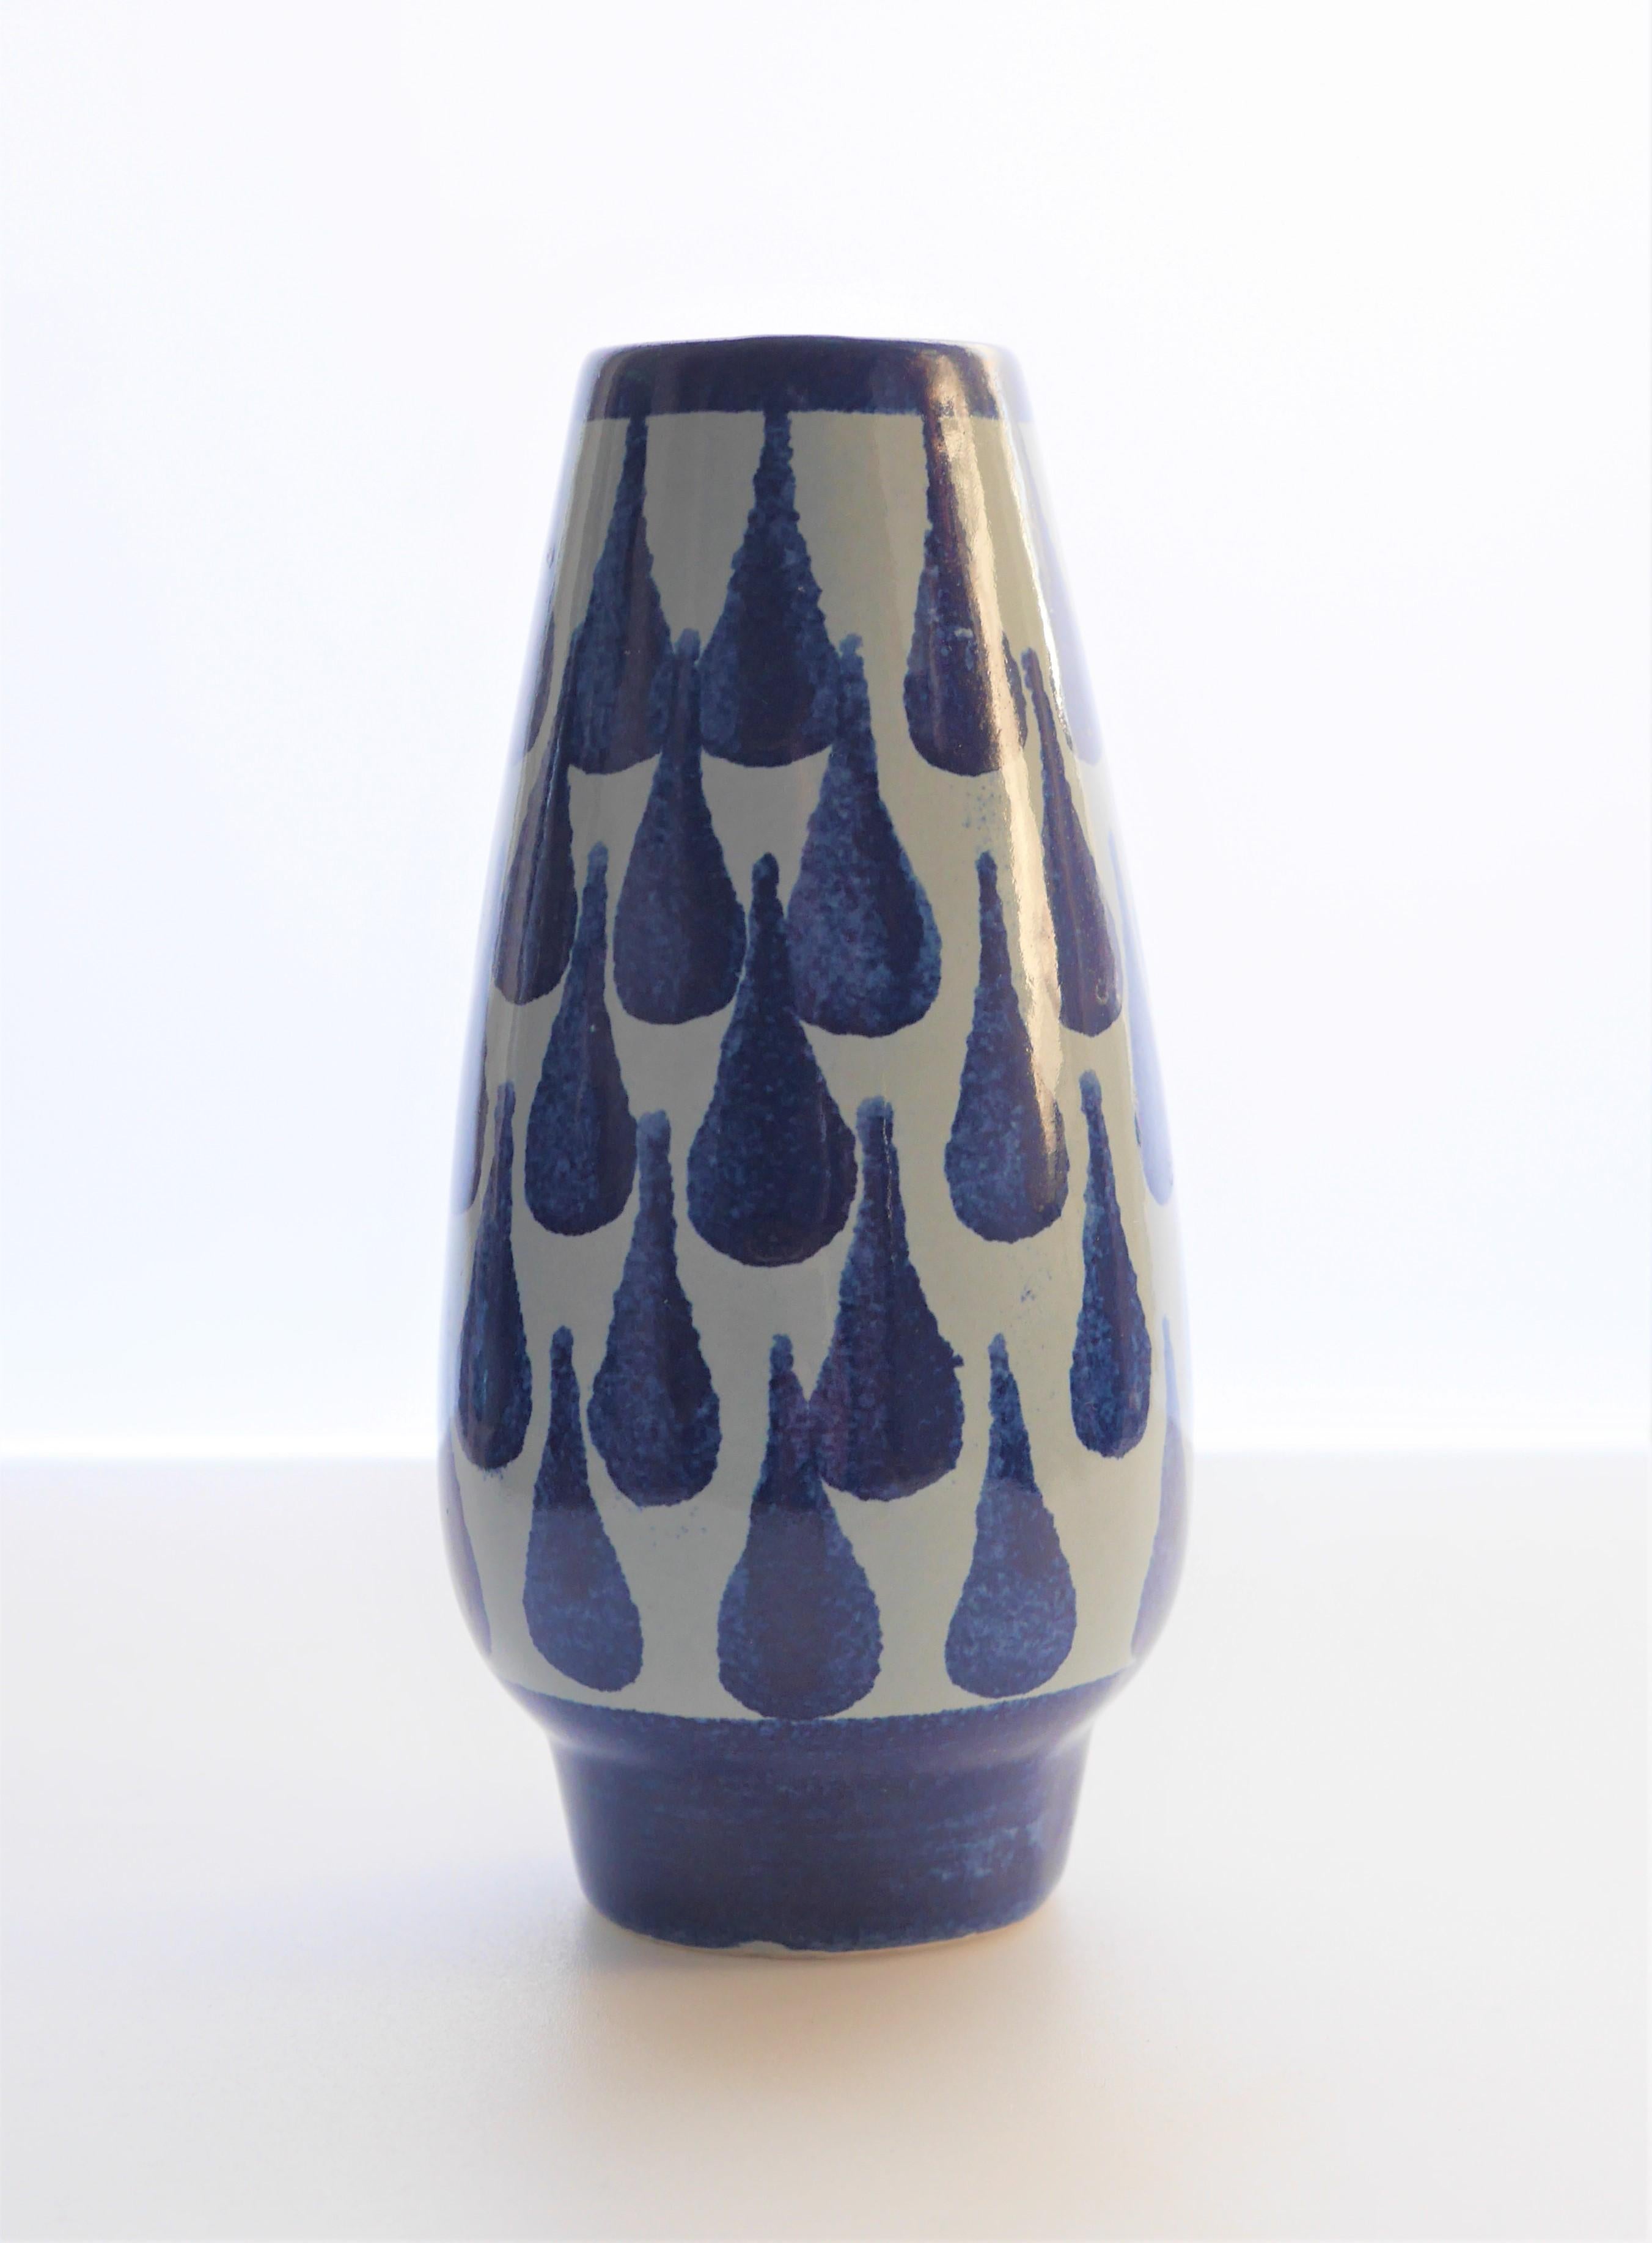 Glazed Small vase decorated with blue drop pattern from Strehla Keramik, Germany.  For Sale